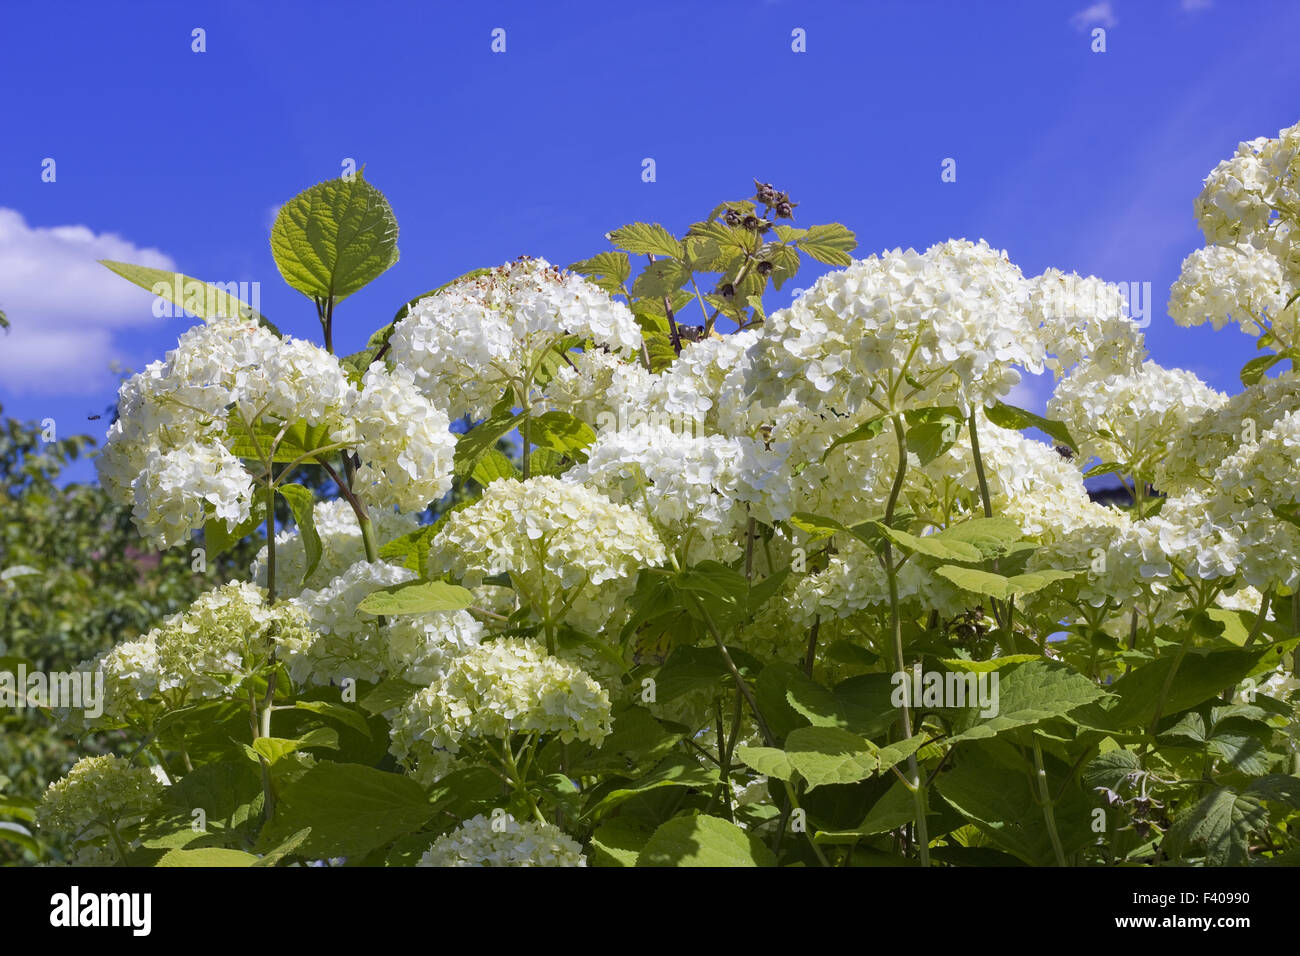 Clusters of white flowers Stock Photo